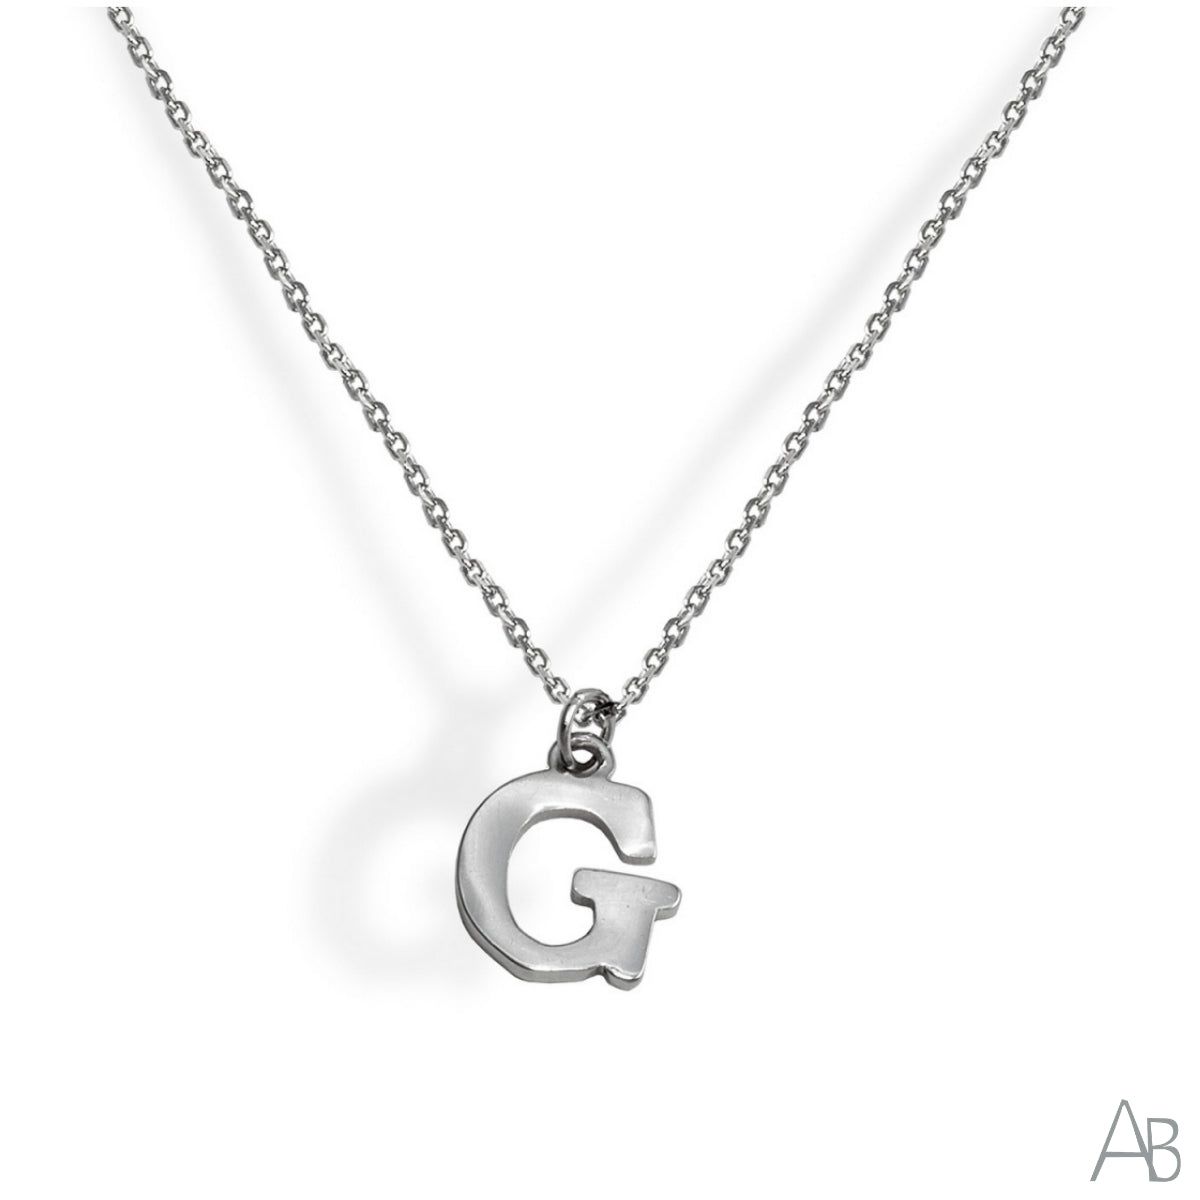 SILVER NECKLACE LETTER G